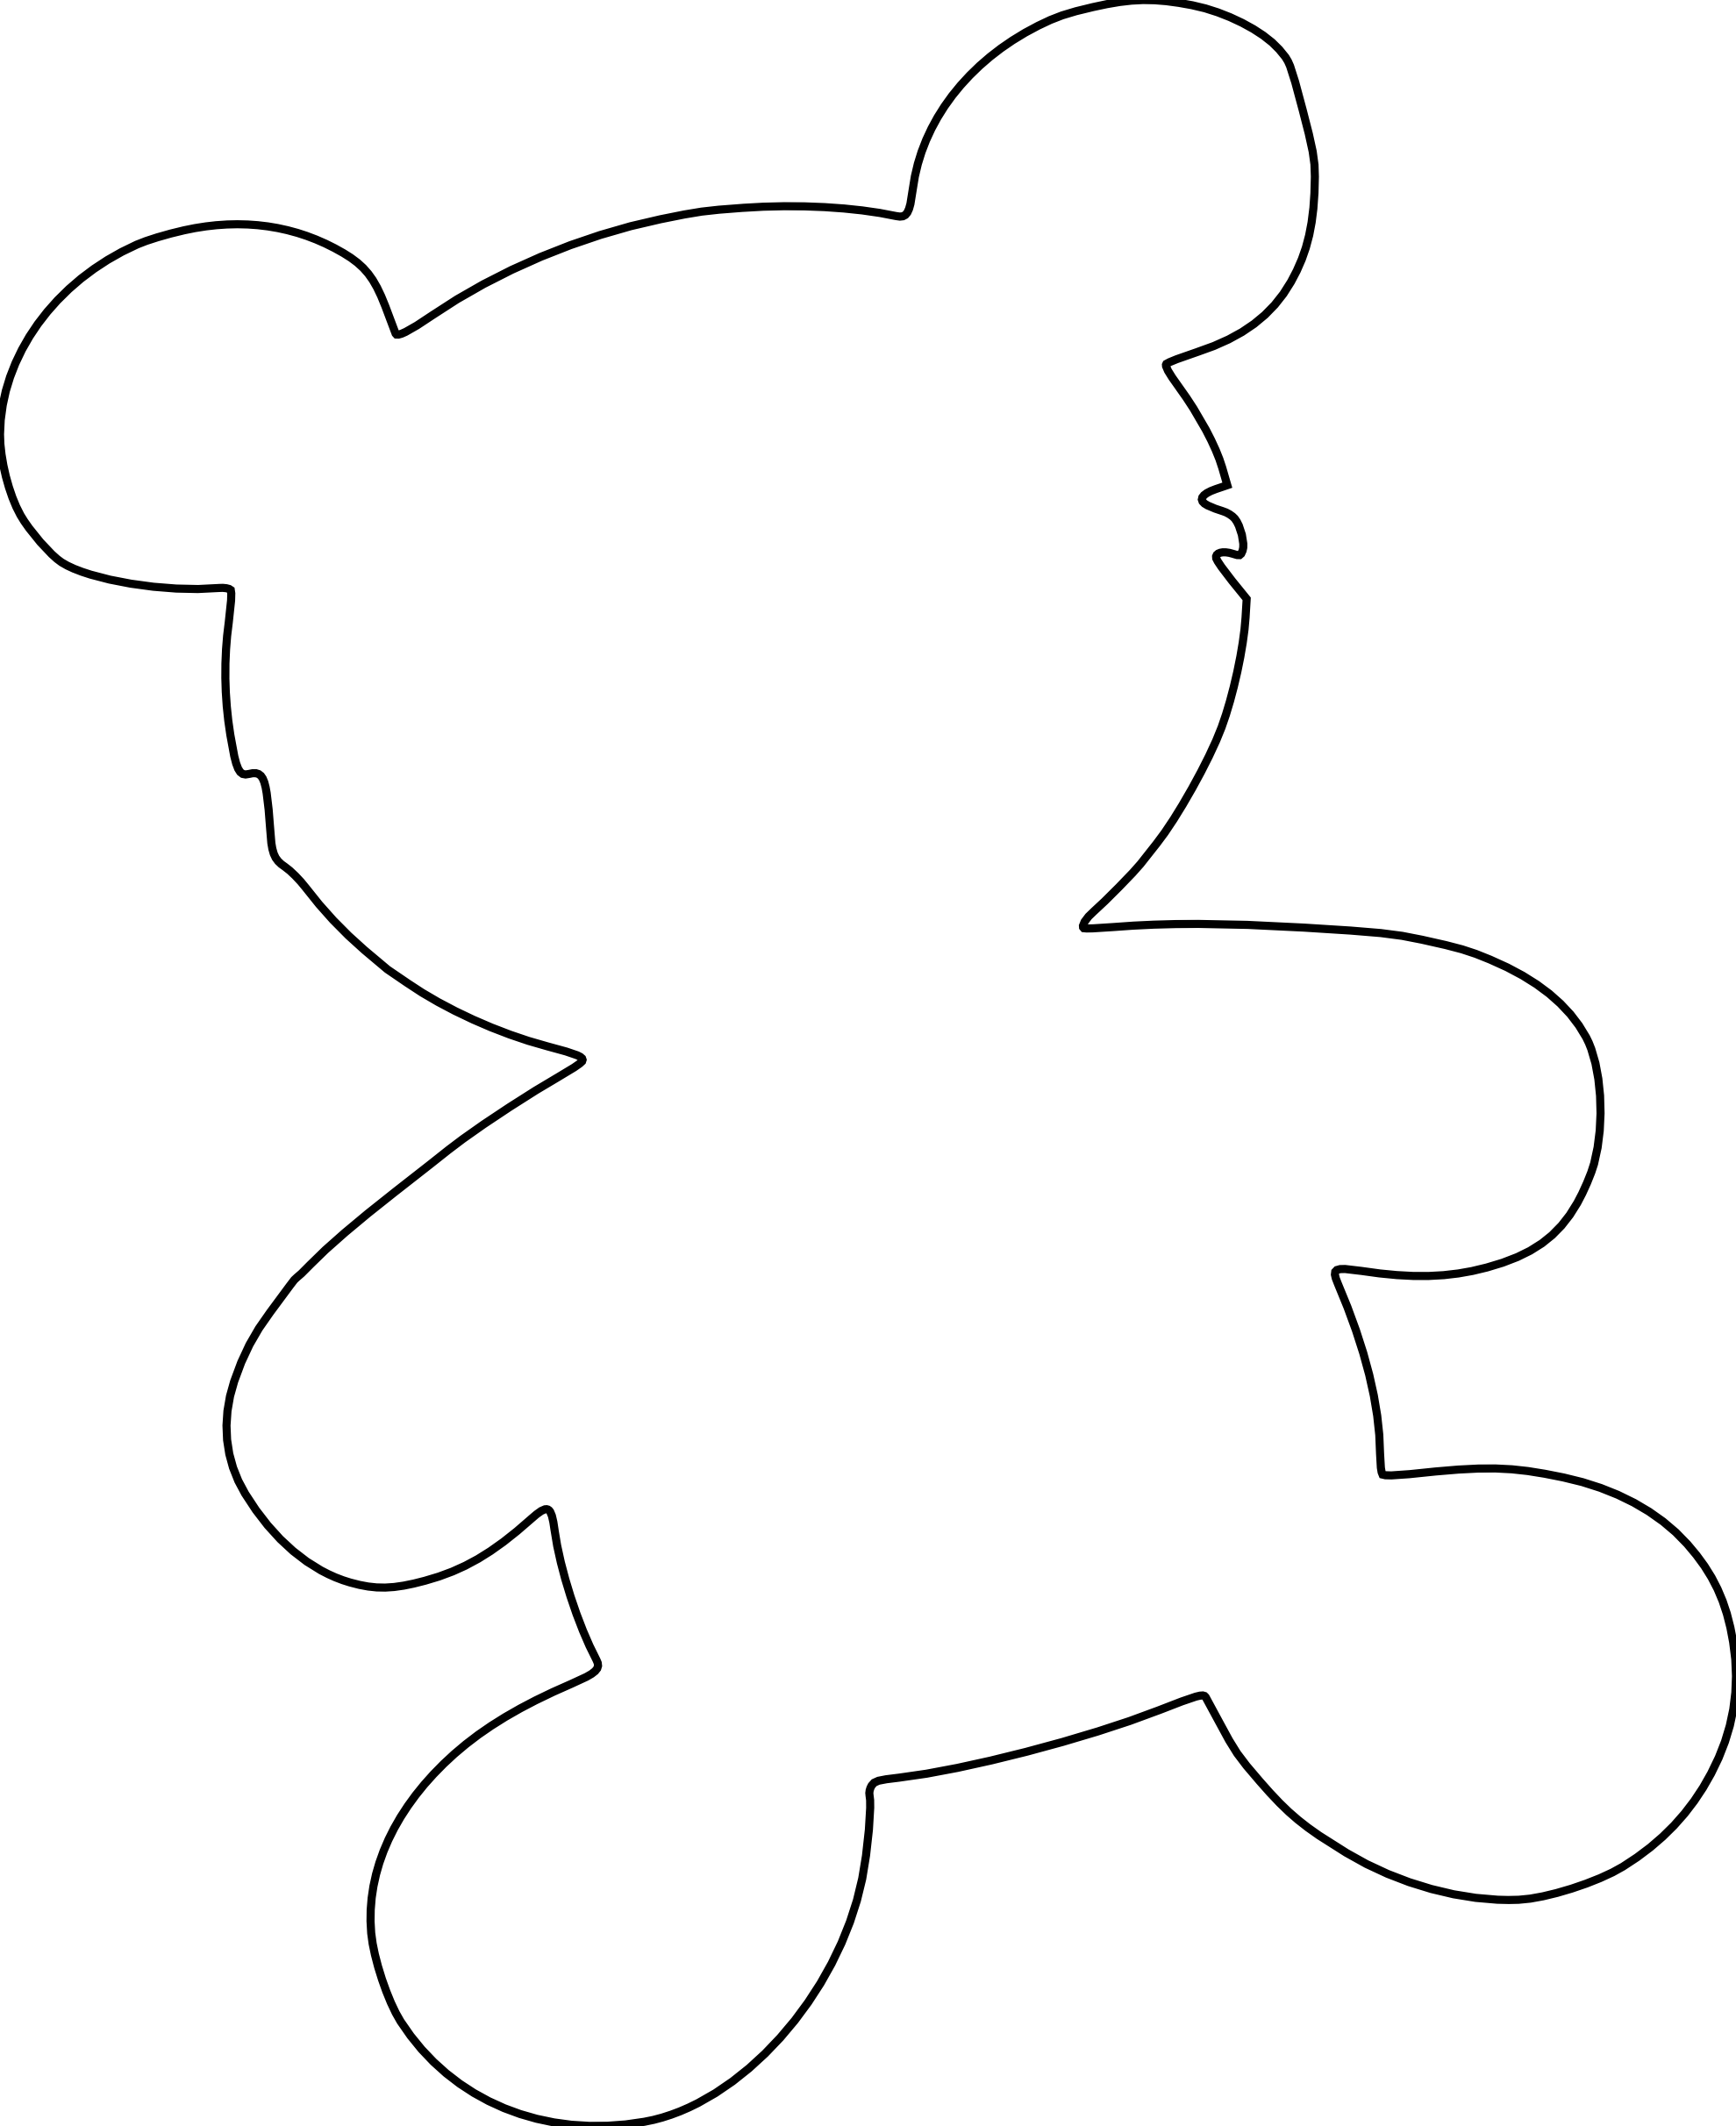 free-line-drawing-teddy-bear-download-free-line-drawing-teddy-bear-png